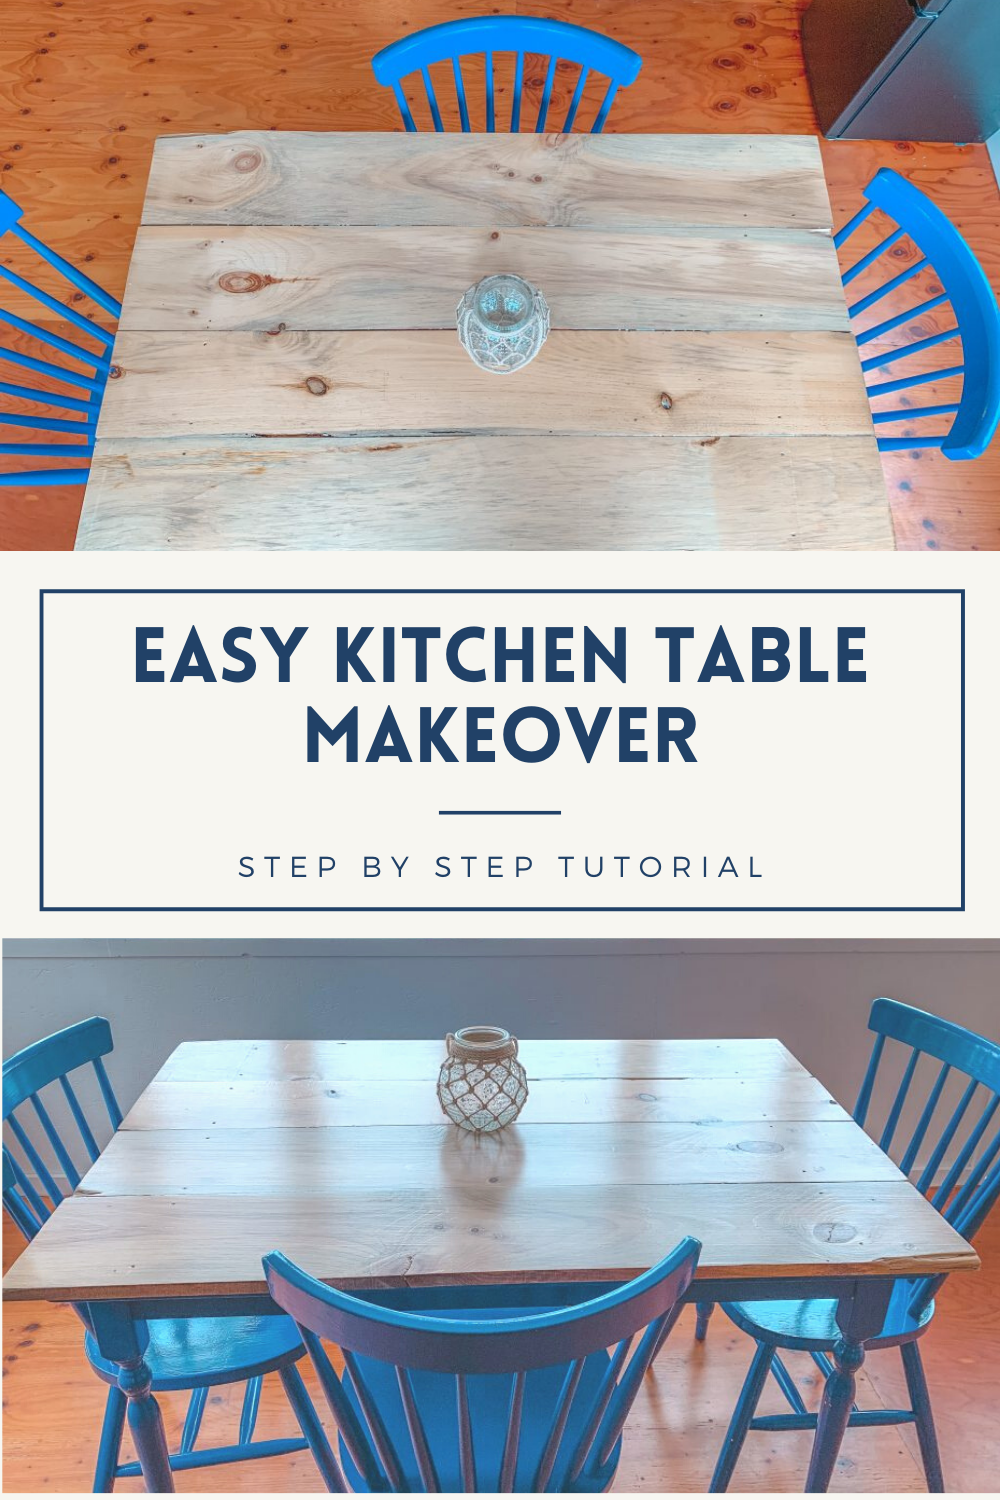 If you are looking to give some of your old furniture some new life, check out this upcycled kitchen table tutorial! This project only took an hour to complete and totally transformed the look of this old table. Check out this post for the full tutorial! You could also use this concept on coffee tables and desks.